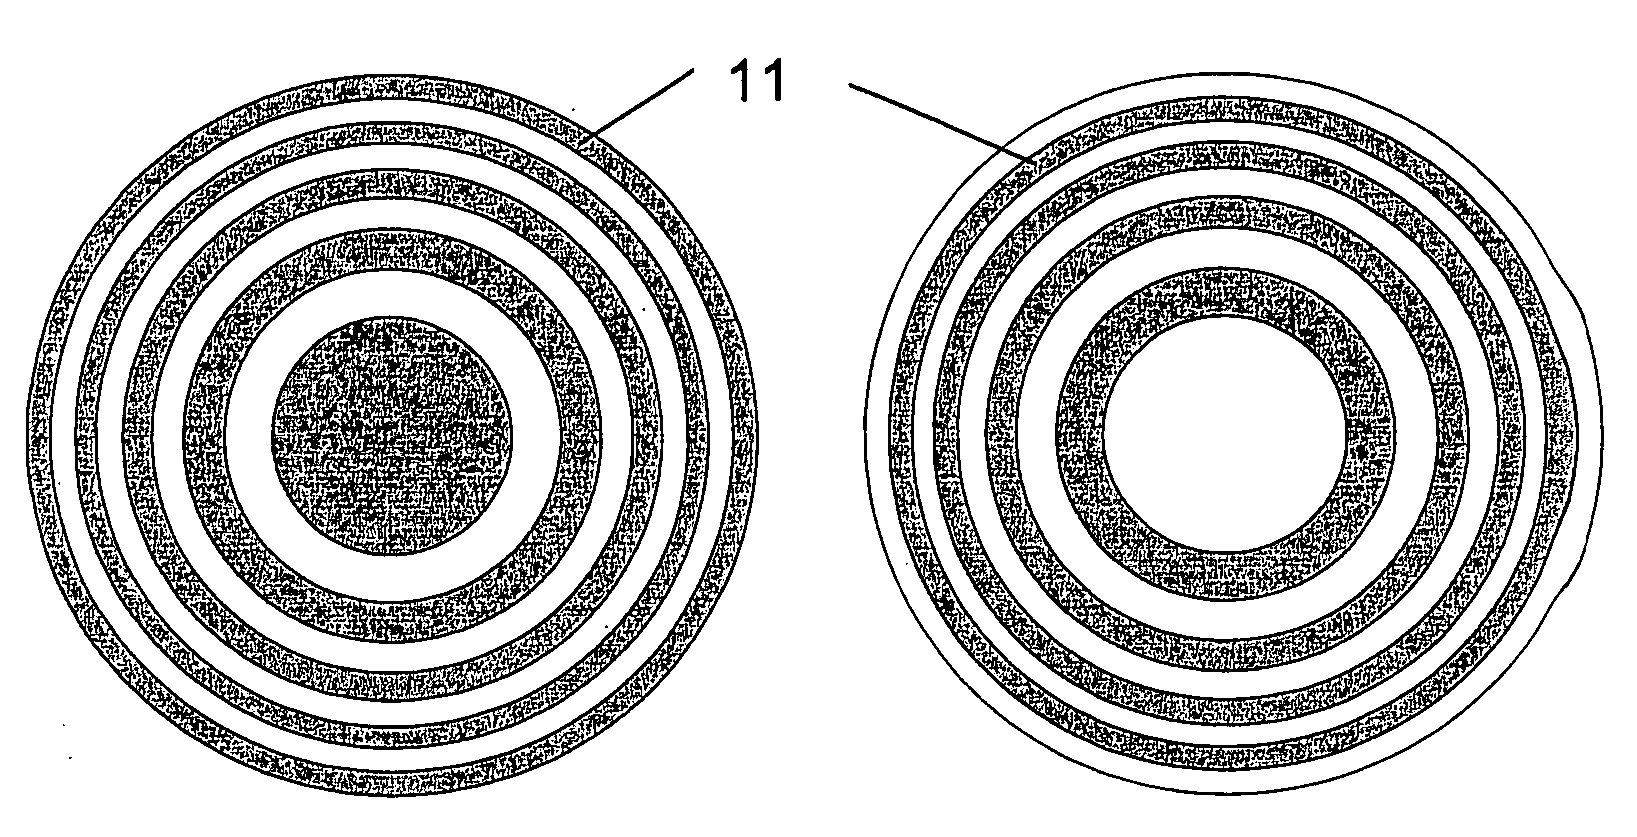 Variable focal length lens comprising micromirrors with one degree of freedom translation